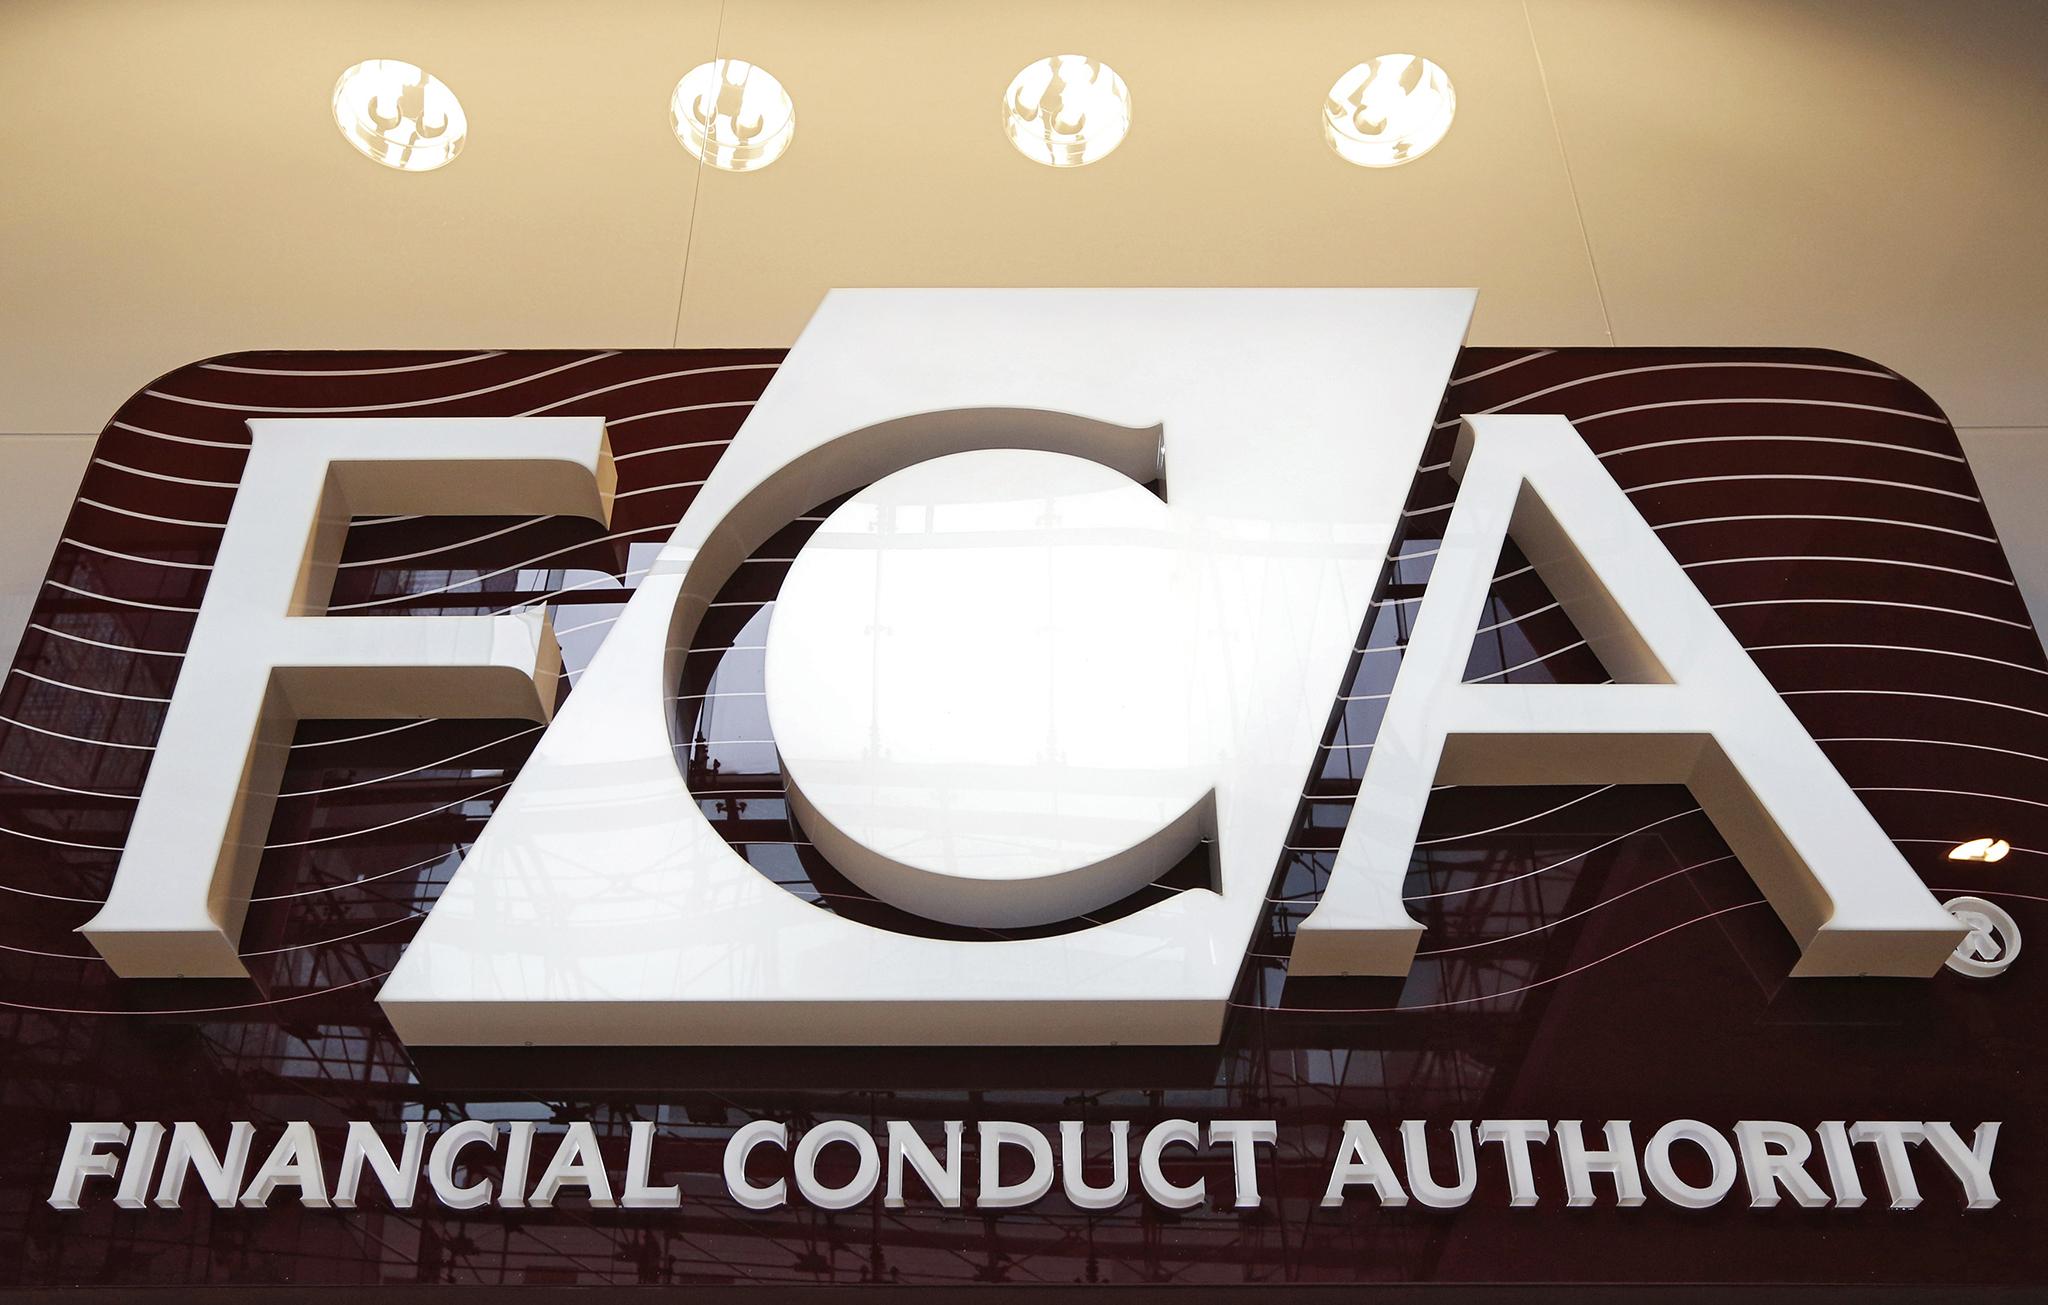 The FCA said it received more than 8,000 reports of potential scams last year